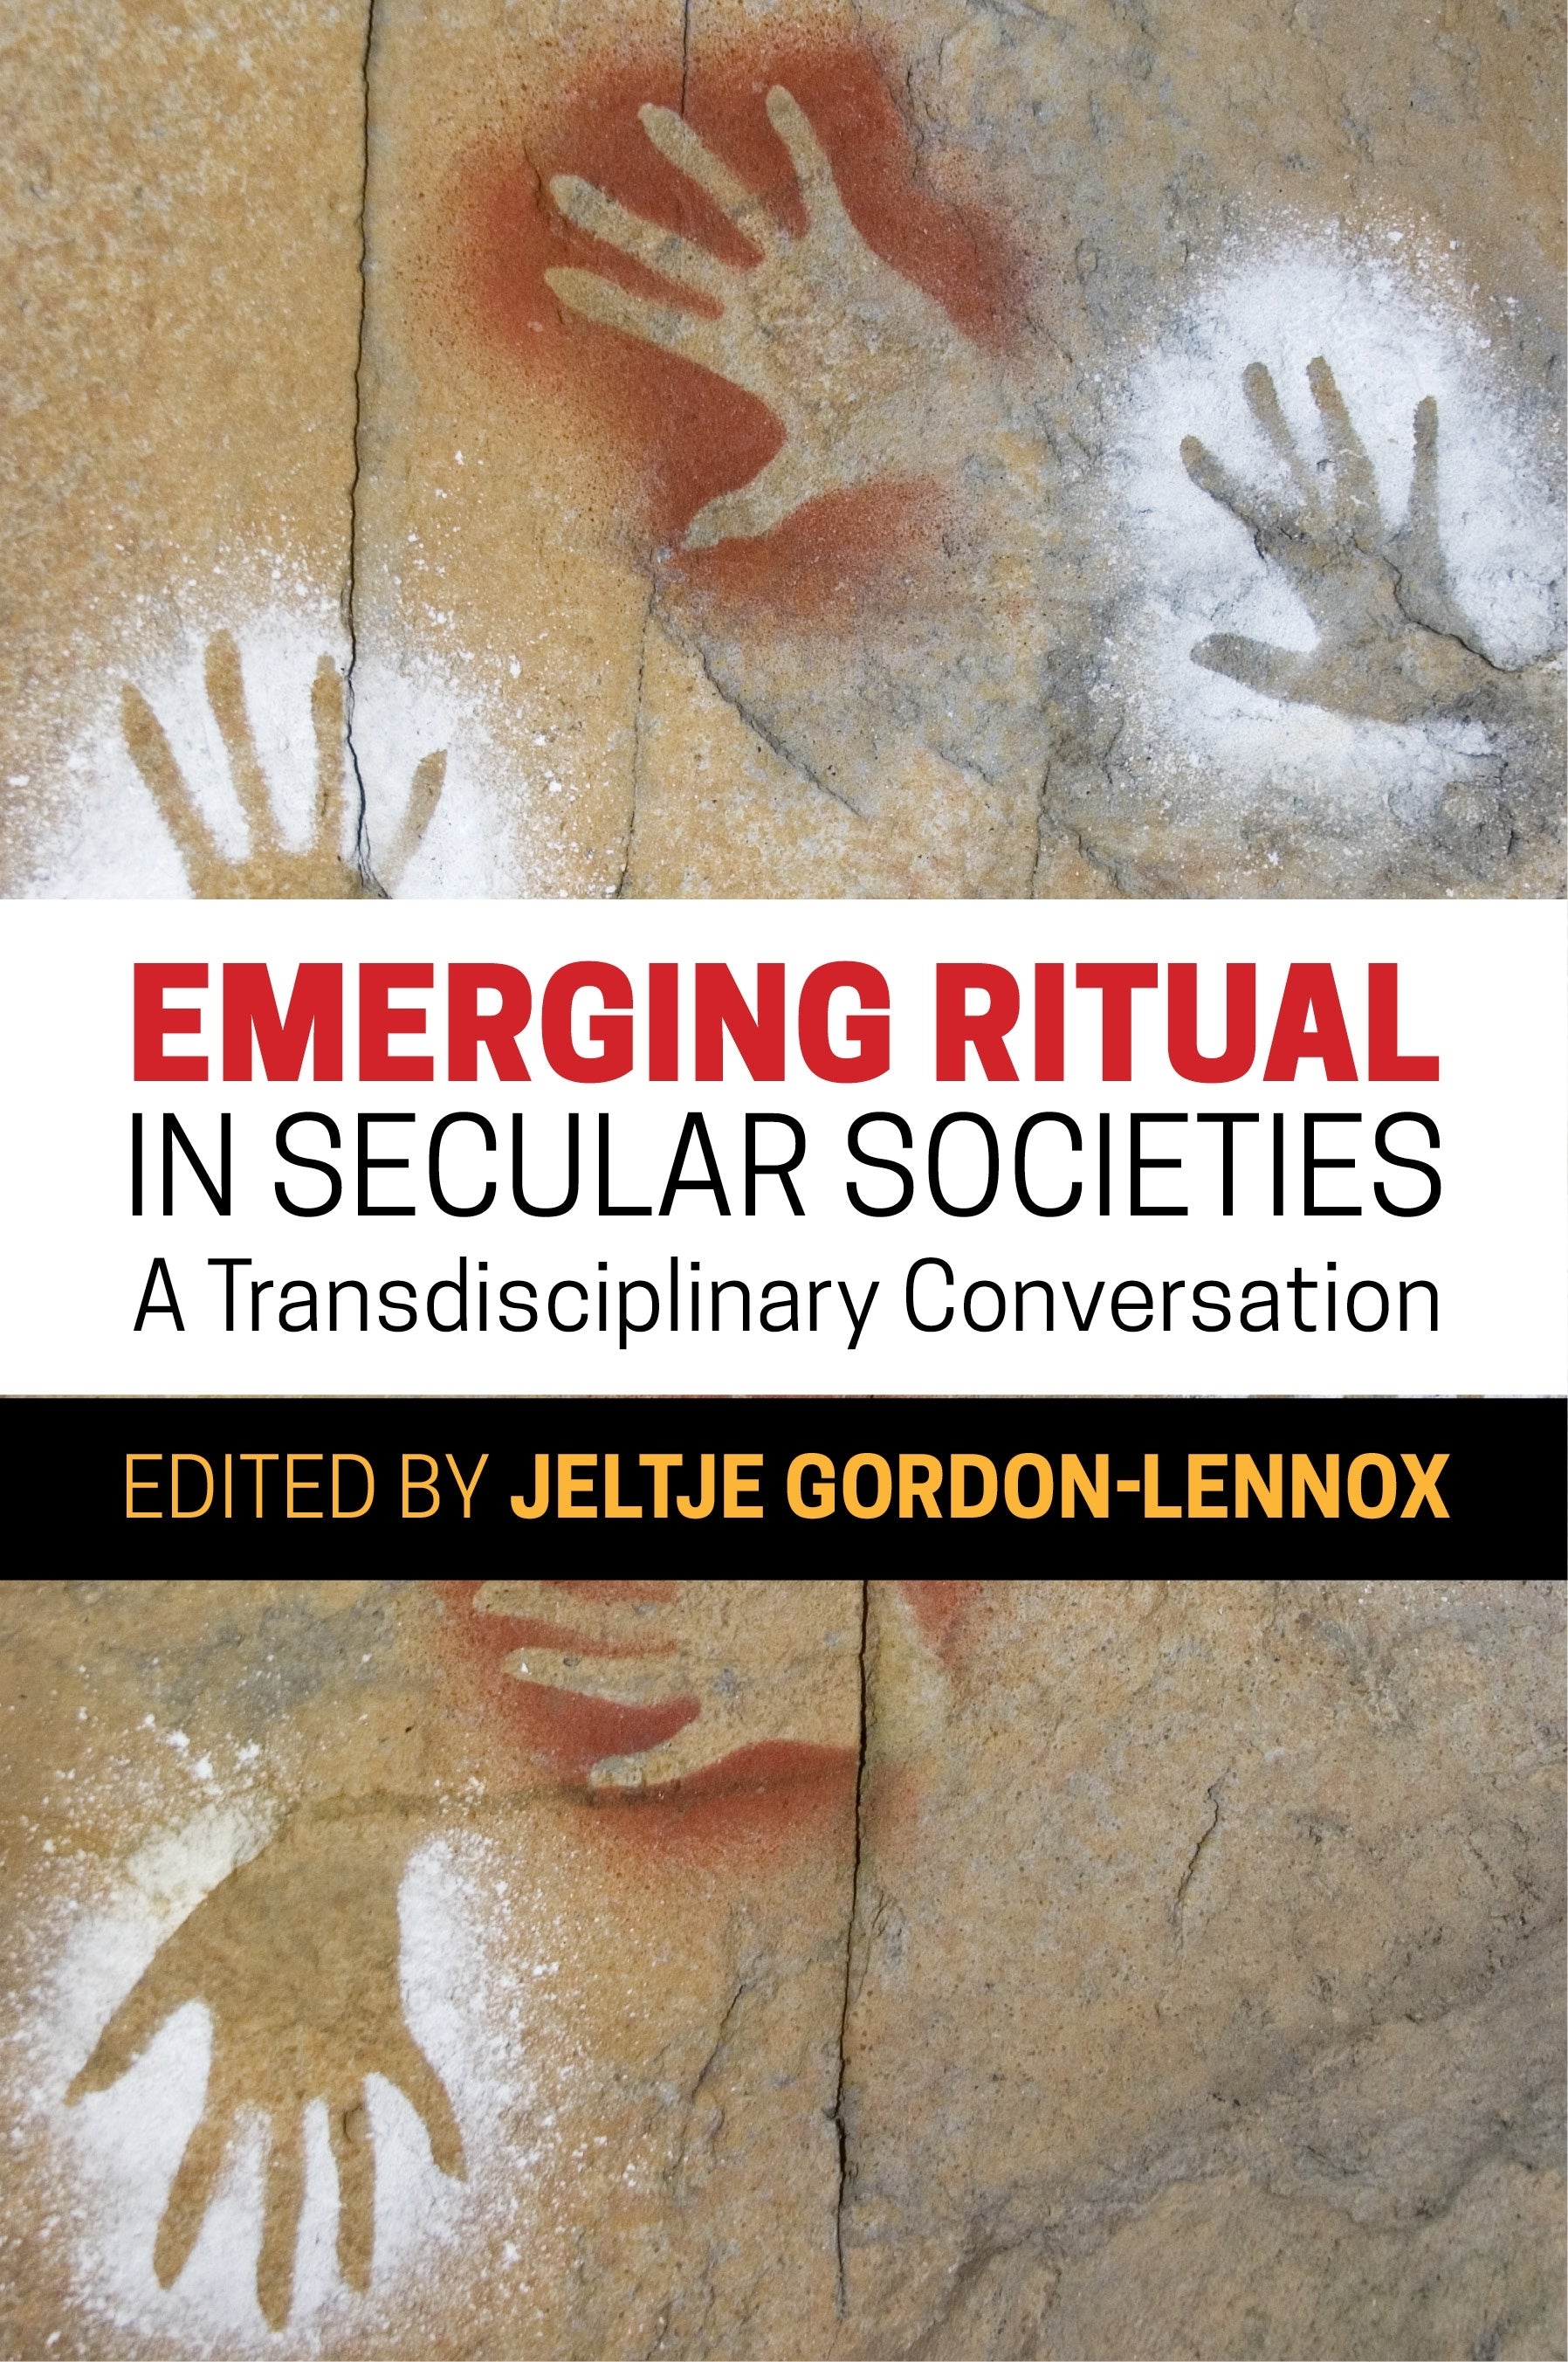 Emerging Ritual in Secular Societies by Jeltje Gordon-Lennox, No Author Listed